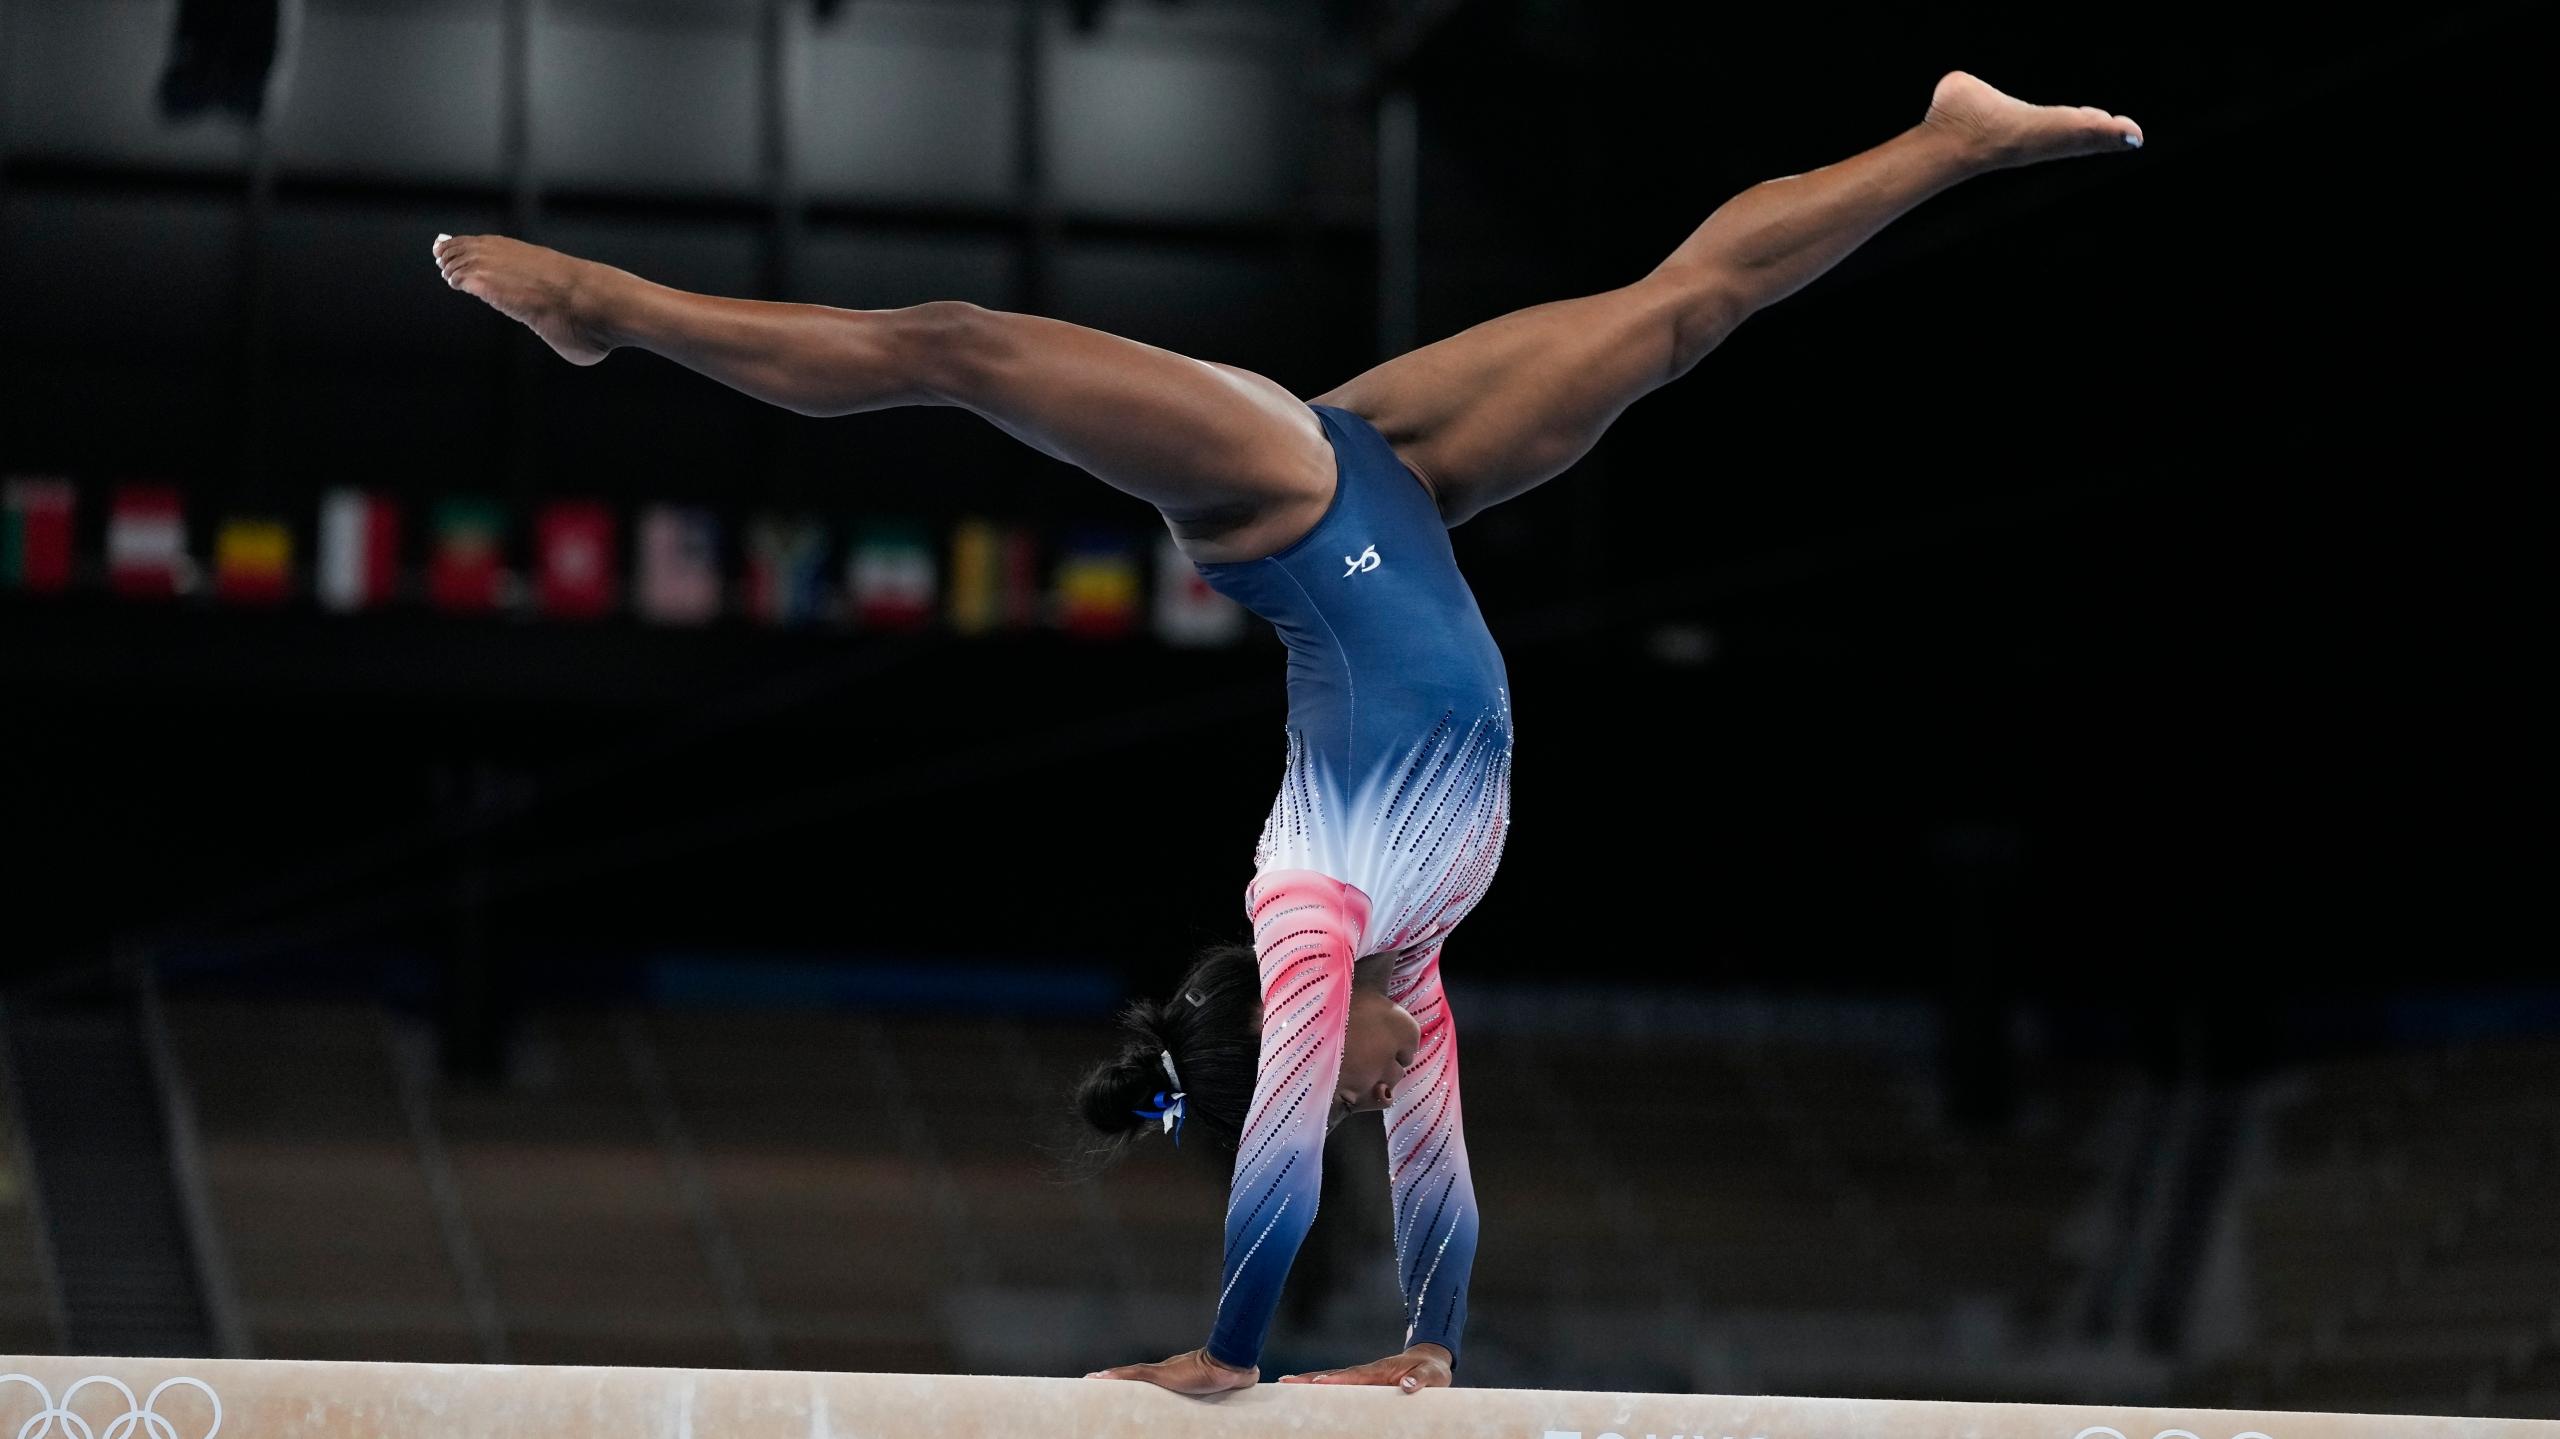 Simone Biles explains competition withdrawal at Olympics: 'My mind